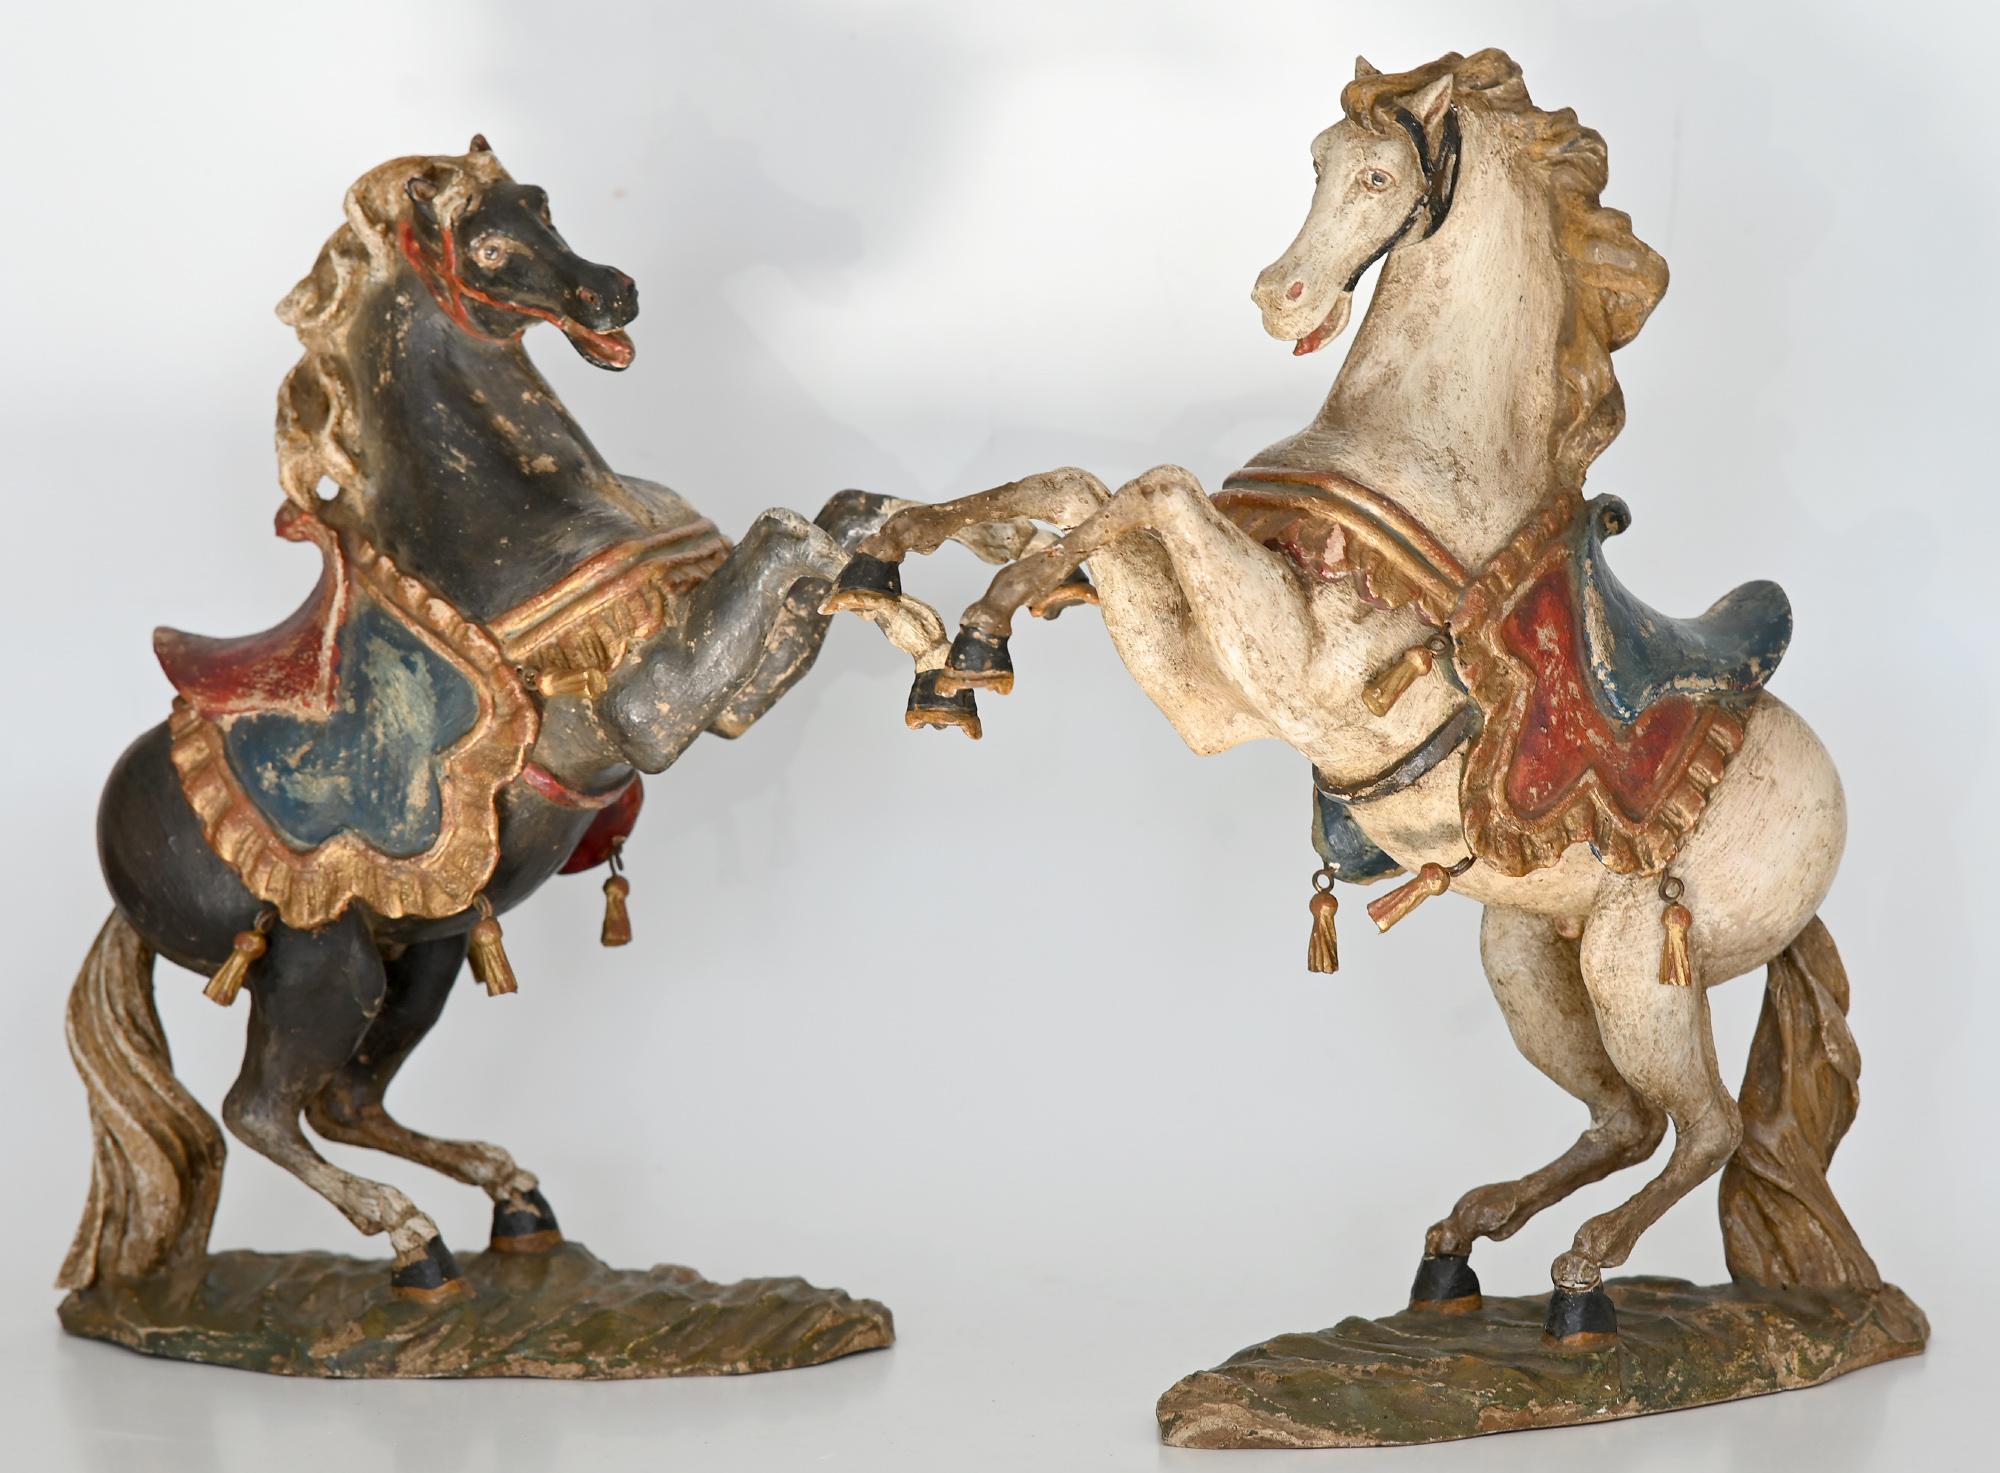 A very nice pair of rising horses, made out of carved wood. The beautiful pair was made circa 1930 in Oberammergau, Bavaria, which is very famous due to the great history of carving in this town. The past of Oberammergau, near the Alps, still